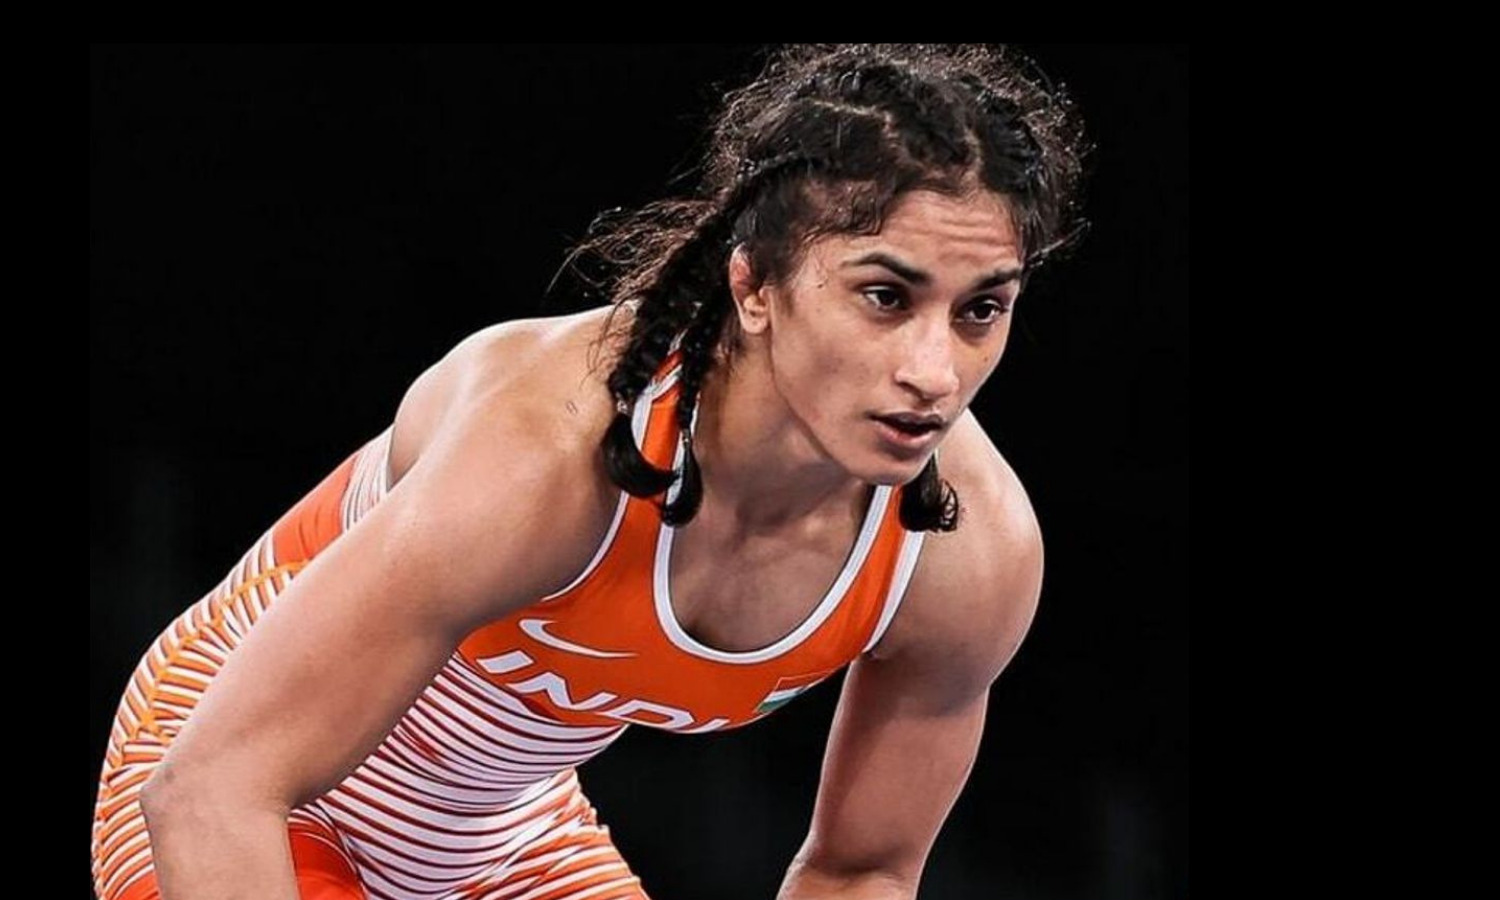 You are currently viewing Wrestlers Vinesh Phogat and Sakshi Malik nominated for BBC Indian Sportswoman of Year Award